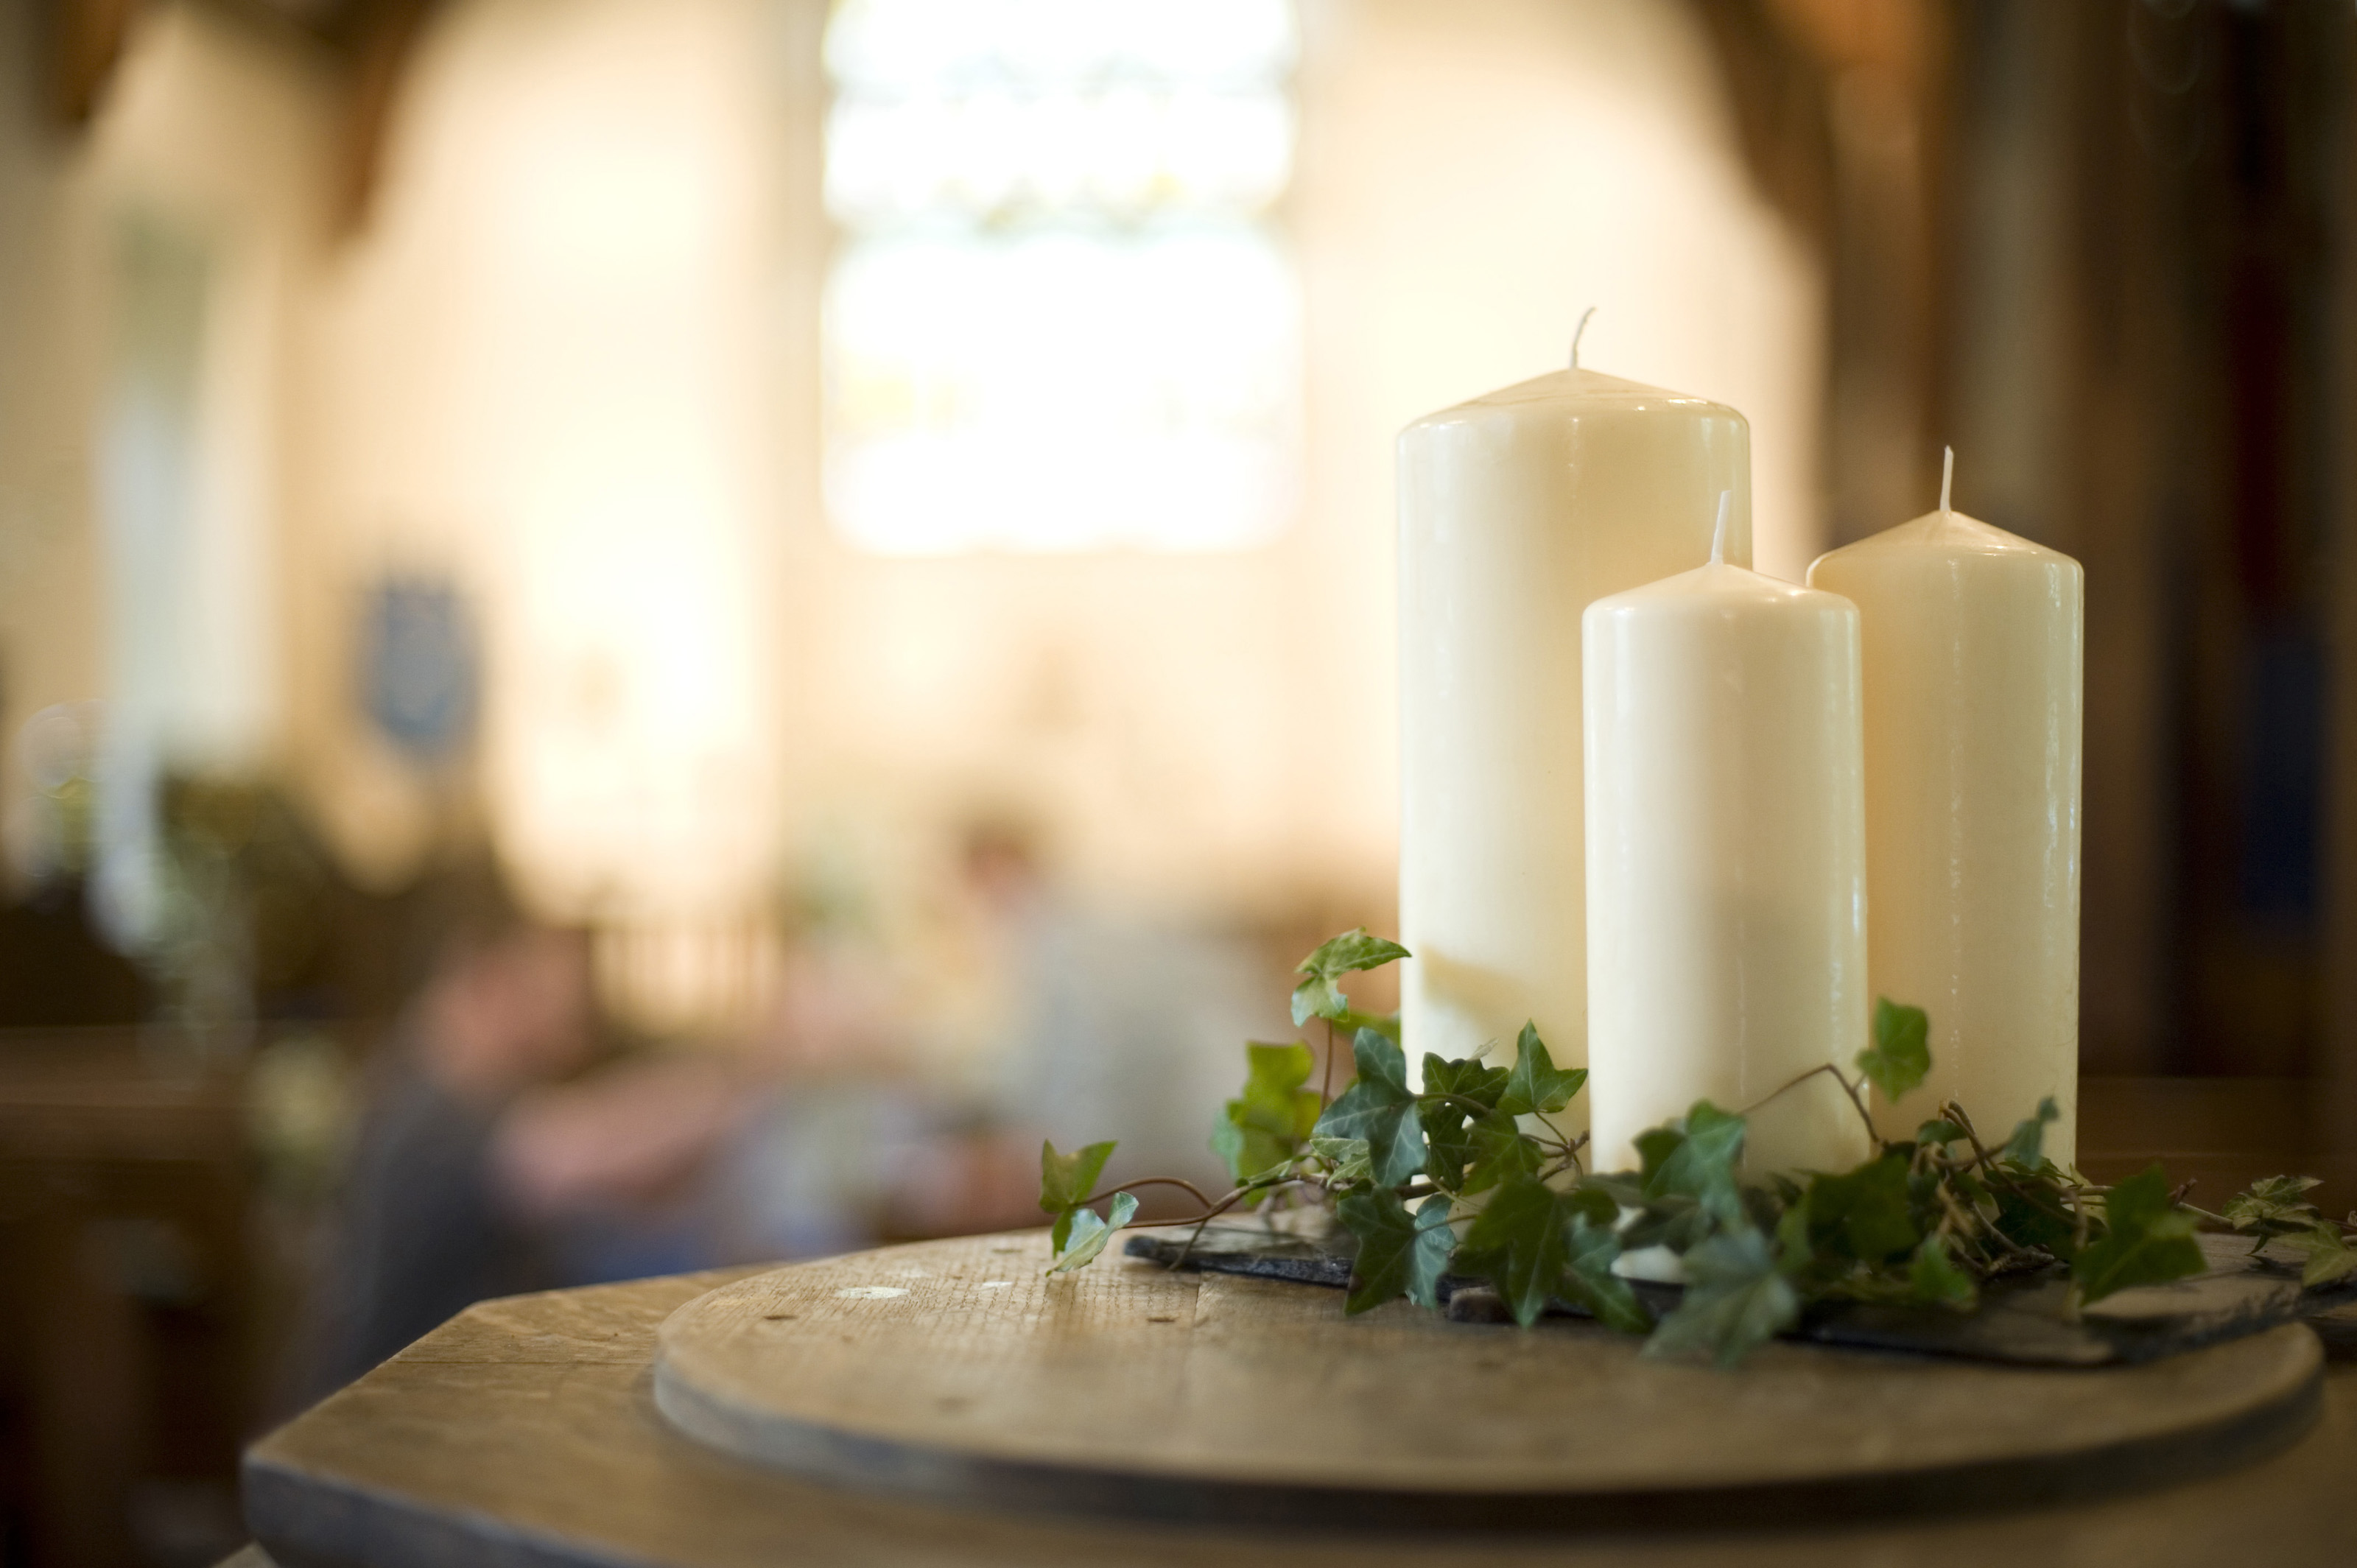 http://www.freeimageslive.com/galleries/festive/wedding/pics/church_candle.jpg